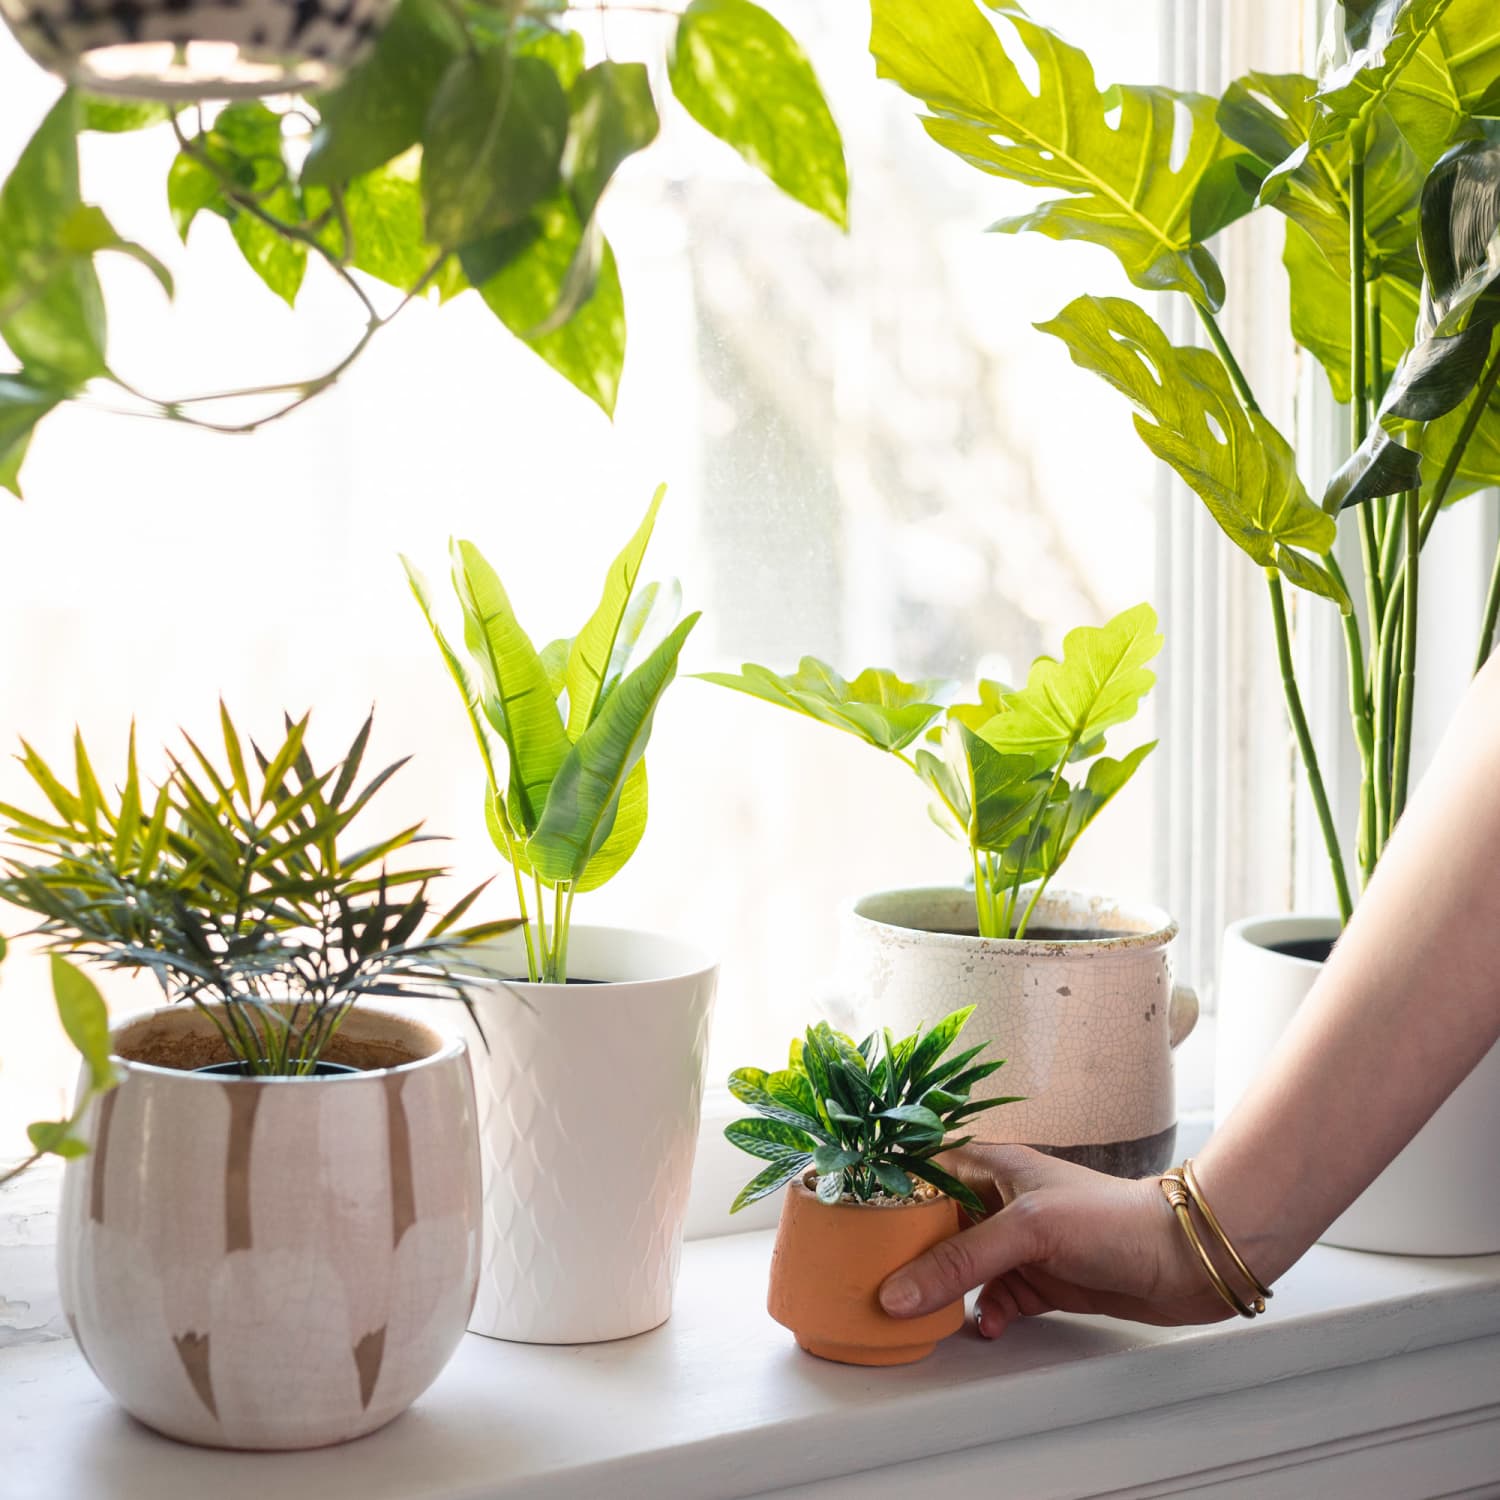 How To Clean Fake Plants Step By Step With Pictures Apartment Therapy - Is It Bad To Have Fake Plants In Your House